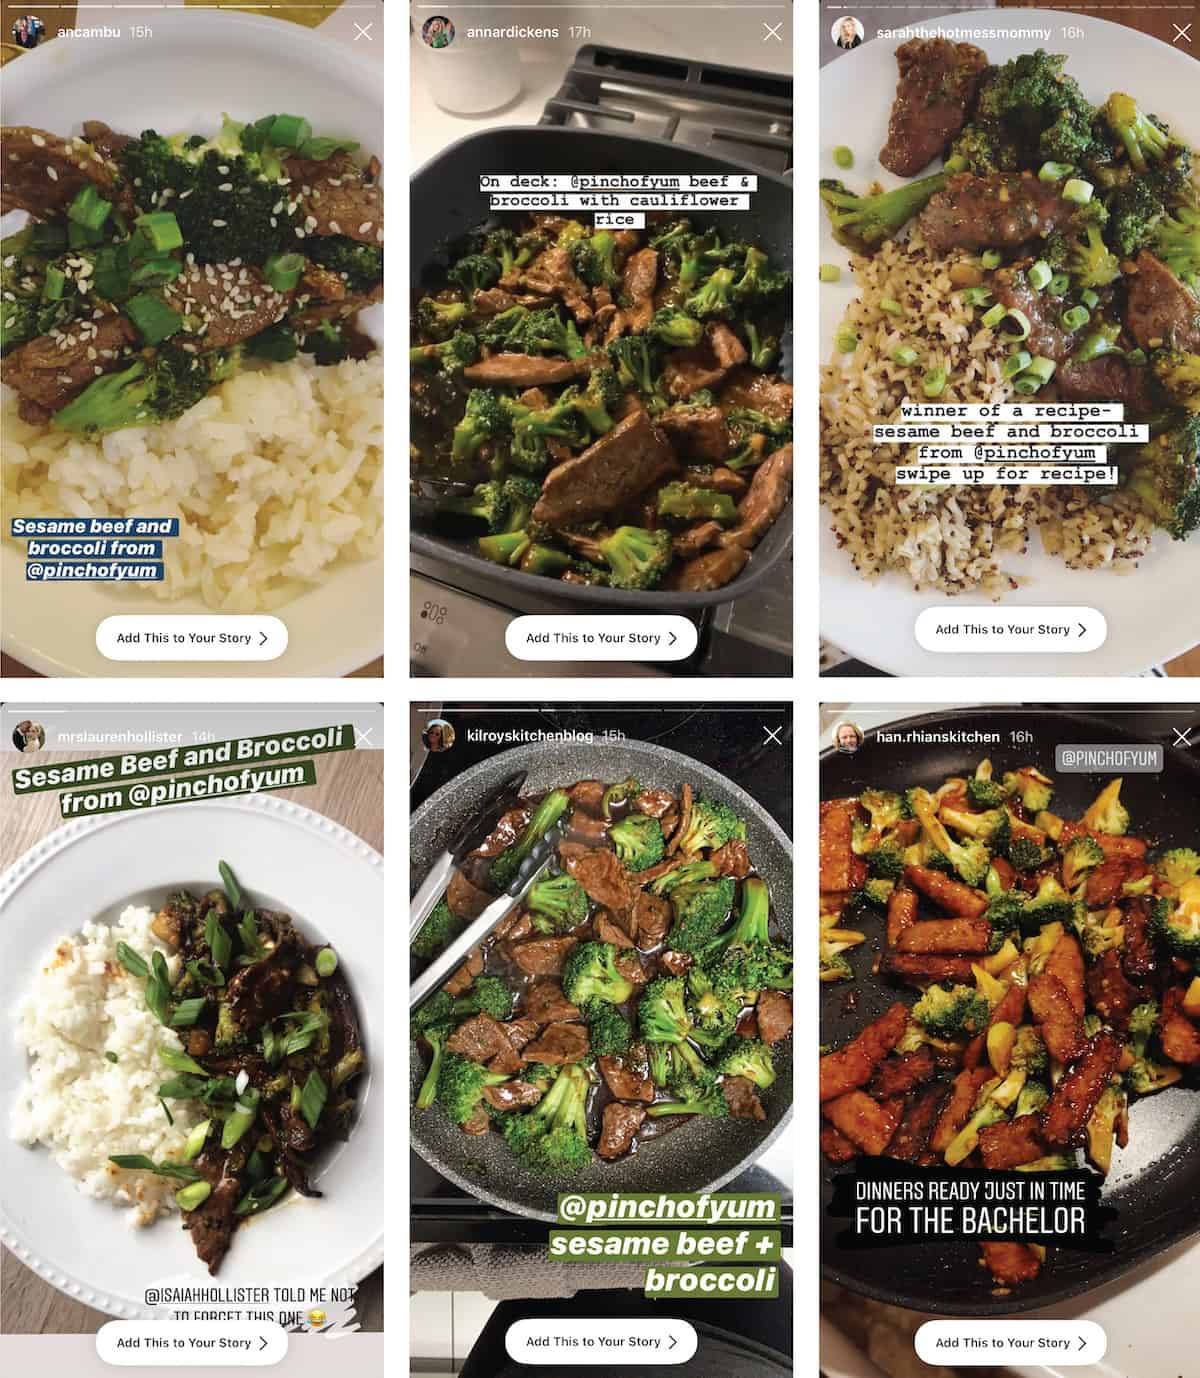 Instagram images of Beef and Broccoli.